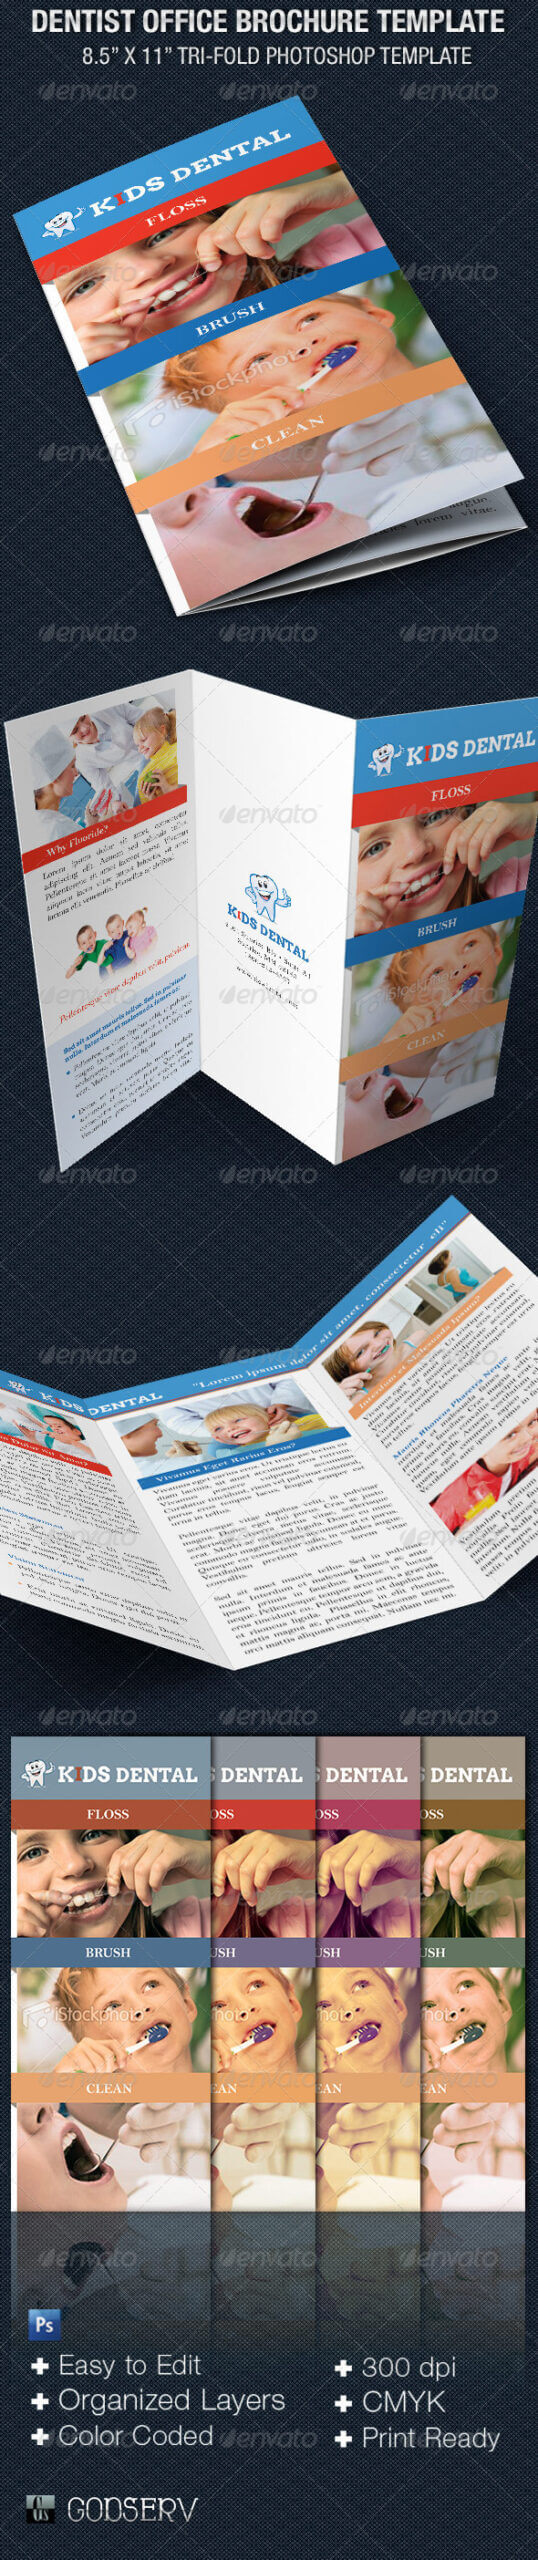 Medical Theme Stationery And Design Templates From Graphicriver Inside Medical Office Brochure Templates